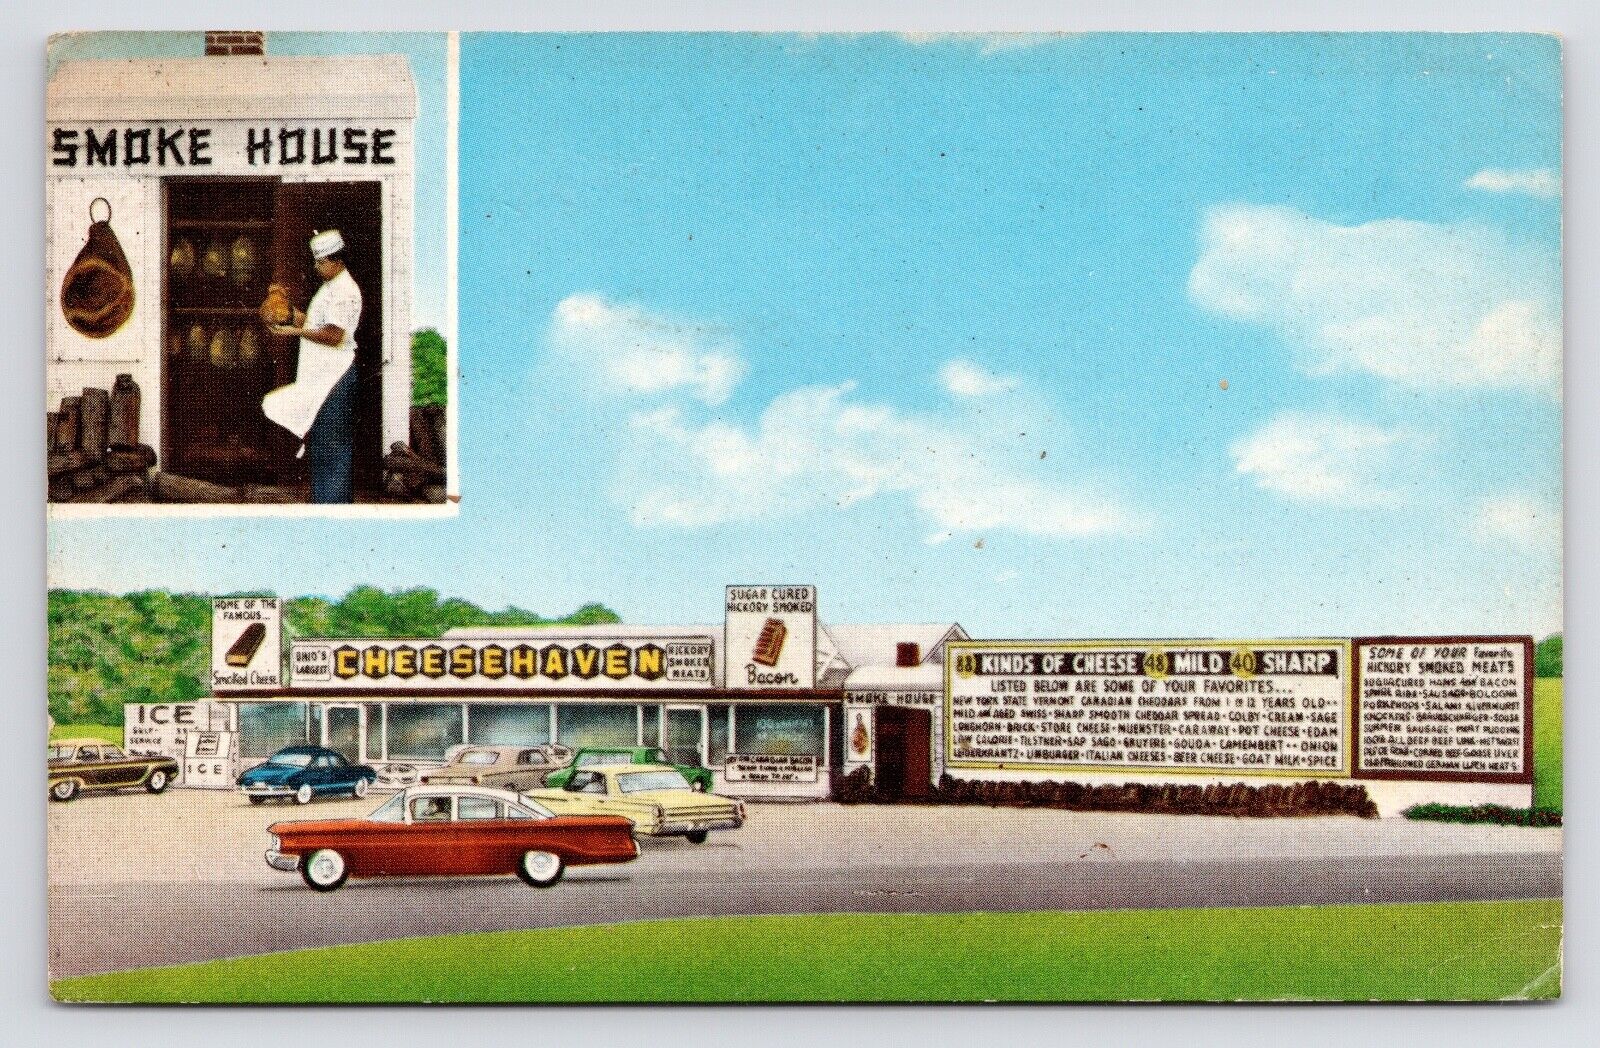 c1960s~Port Clinton Ohio OH~Cheese Haven~Smoked Meat Shop~Vintage Postcard